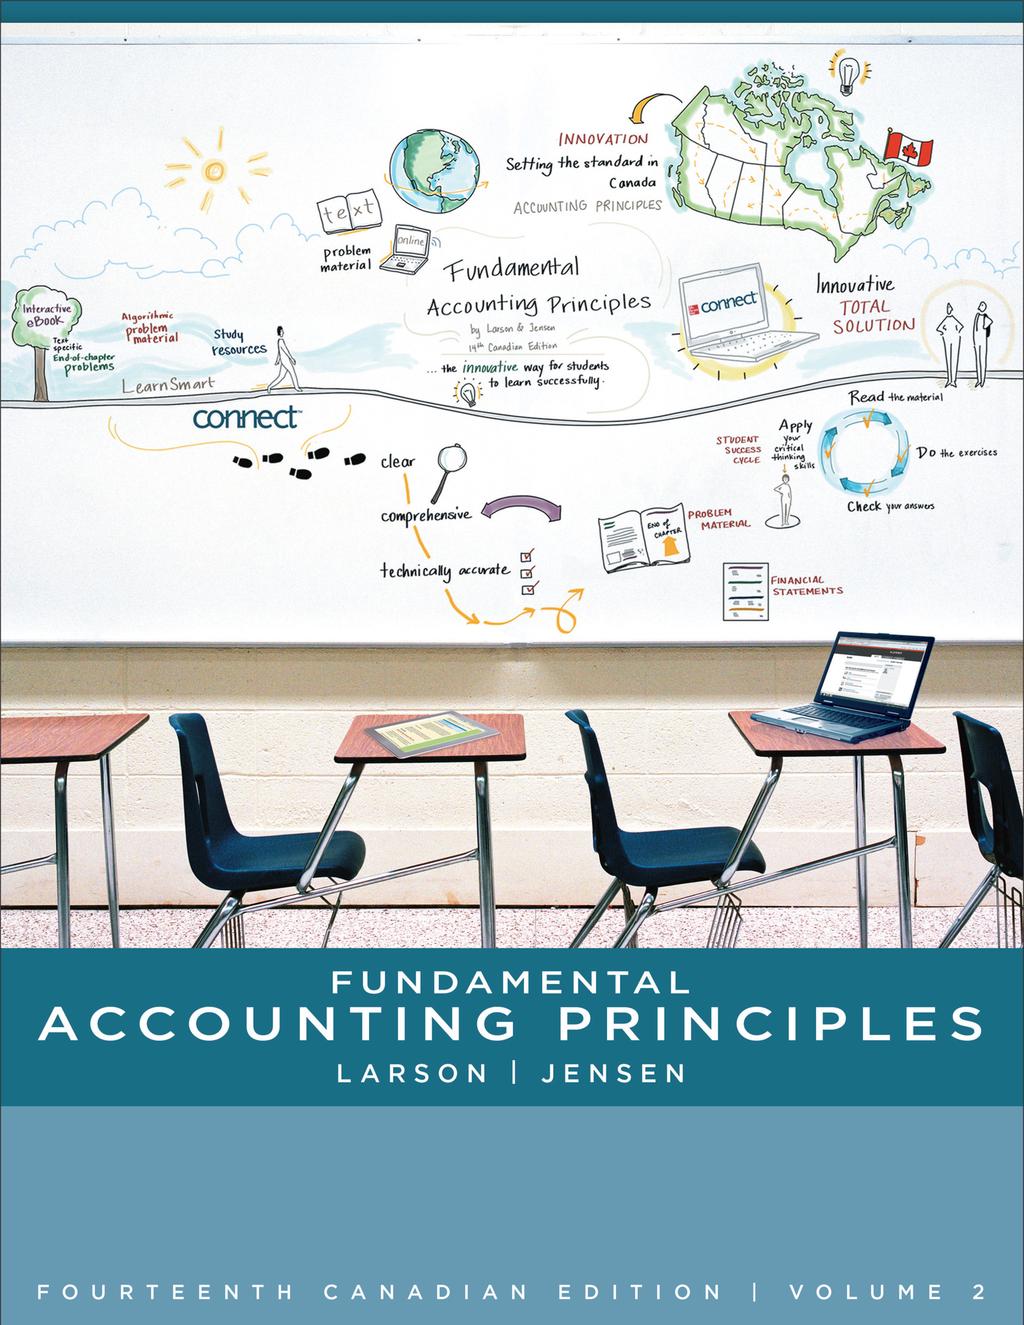 Last revised: Jan 2013 SOLUTIONS MANUAL to accompany Fundamental Accounting Principles 14th Canadian Edition by Larson/Jensen Prepared by: Tilly Jensen, Athabasca University Wendy Popowich, Northern